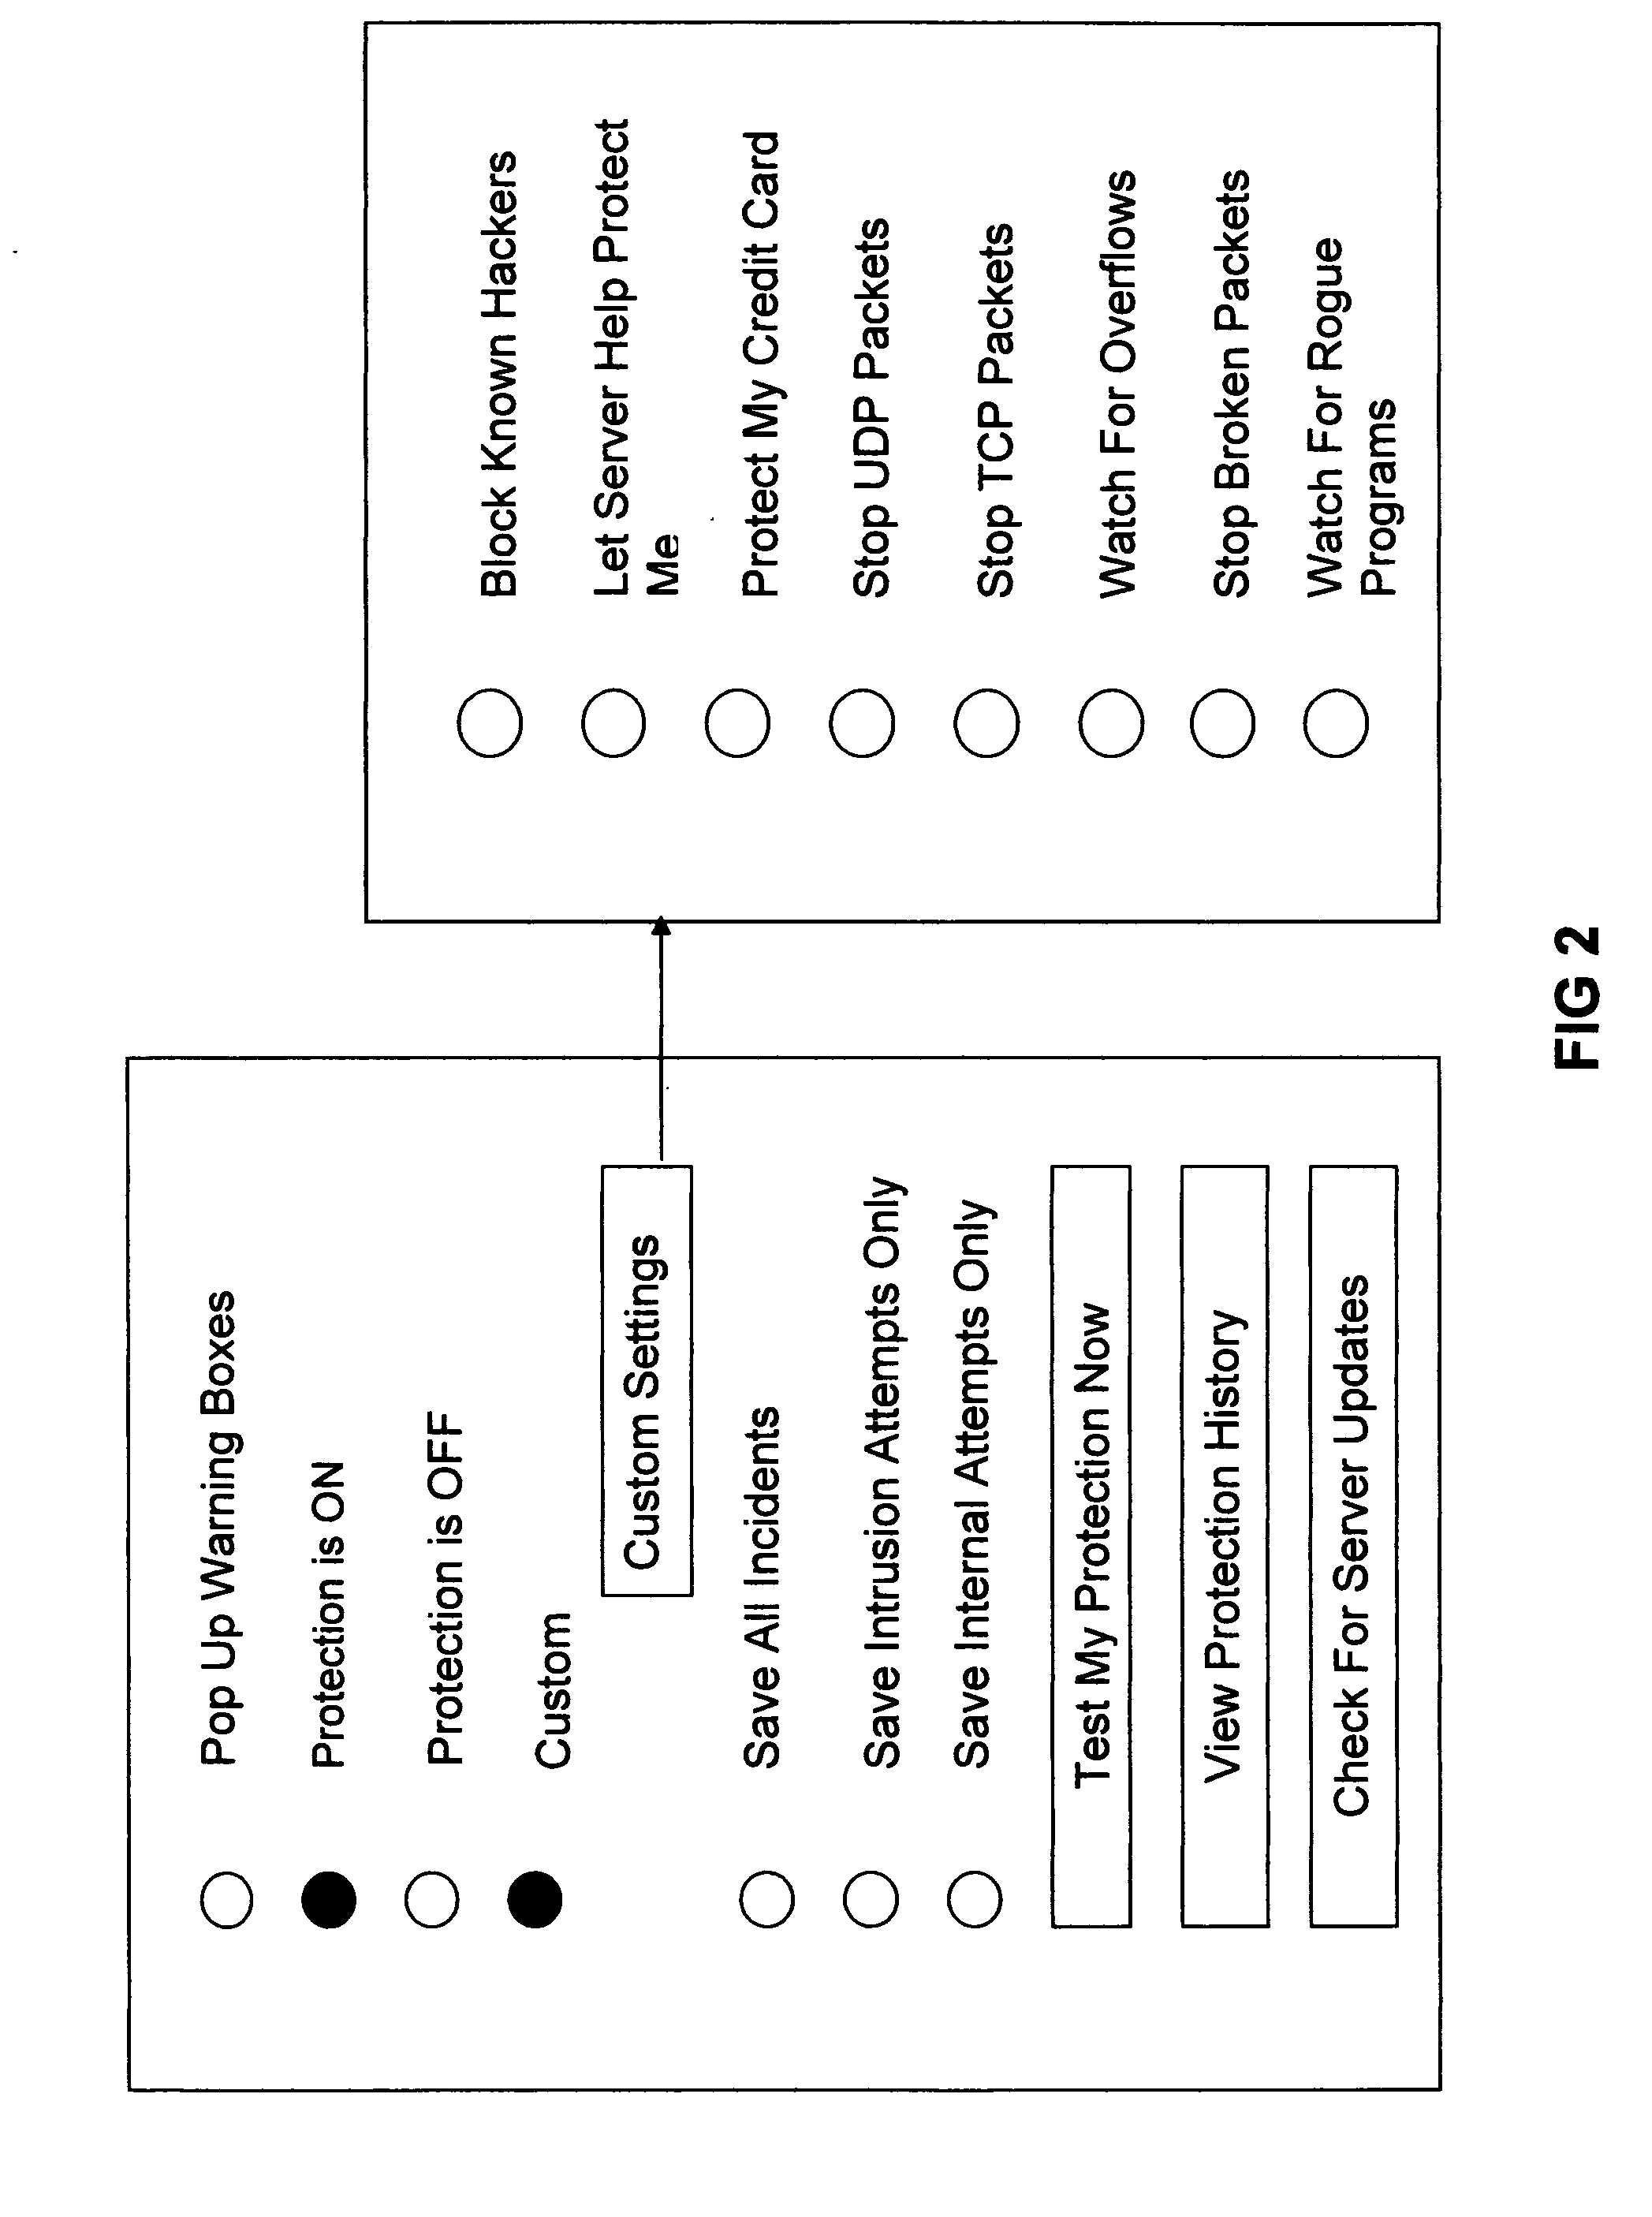 Systems and methods for detecting and preventing unauthorized access to networked devices